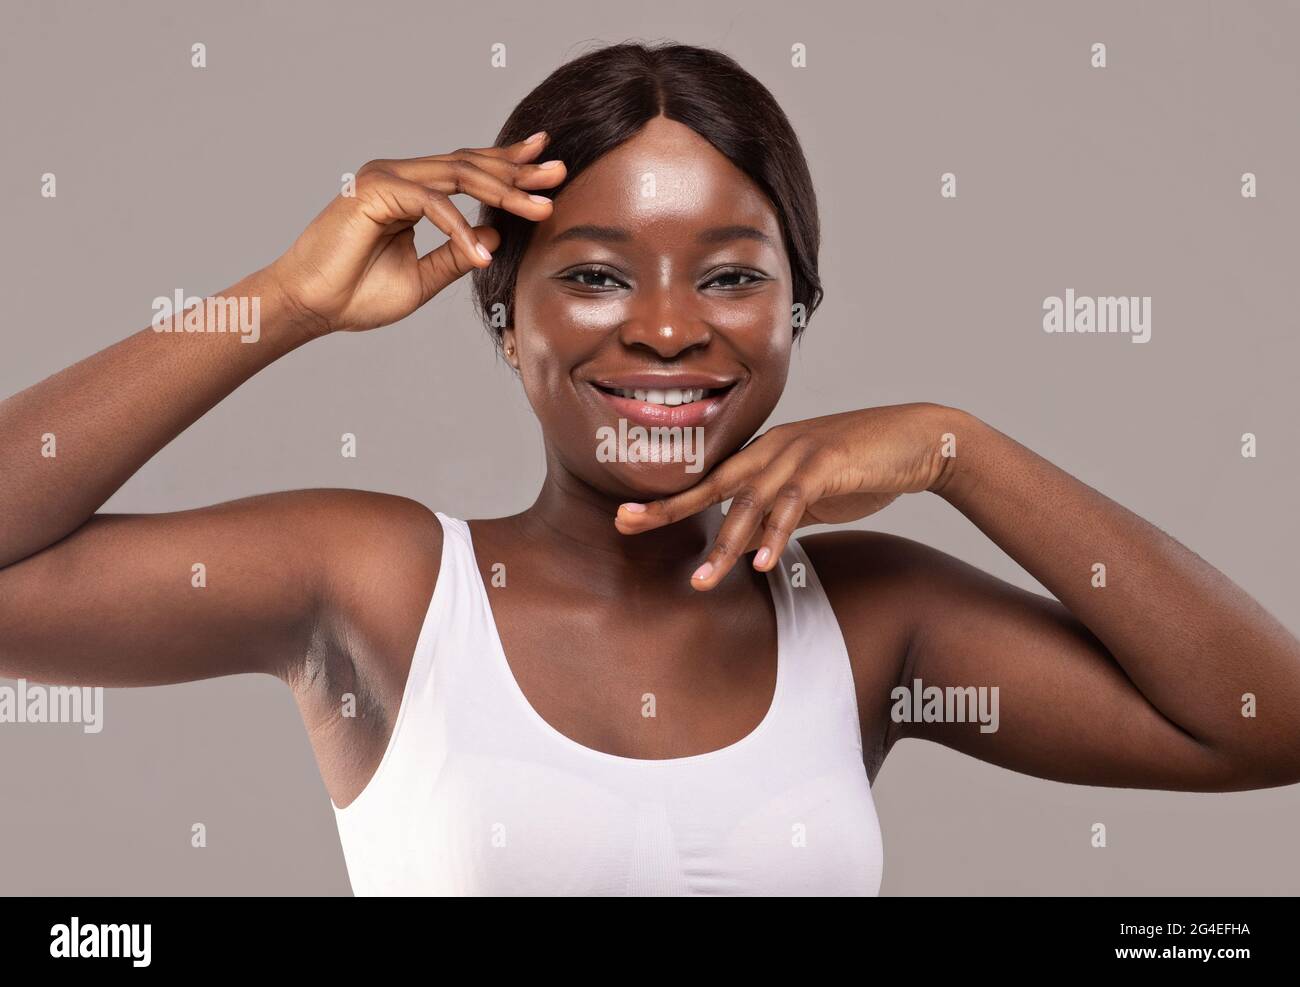 Essential Beauty. Beauty Portrait Of Happy Young African Female With Flawless Skin Stock Photo